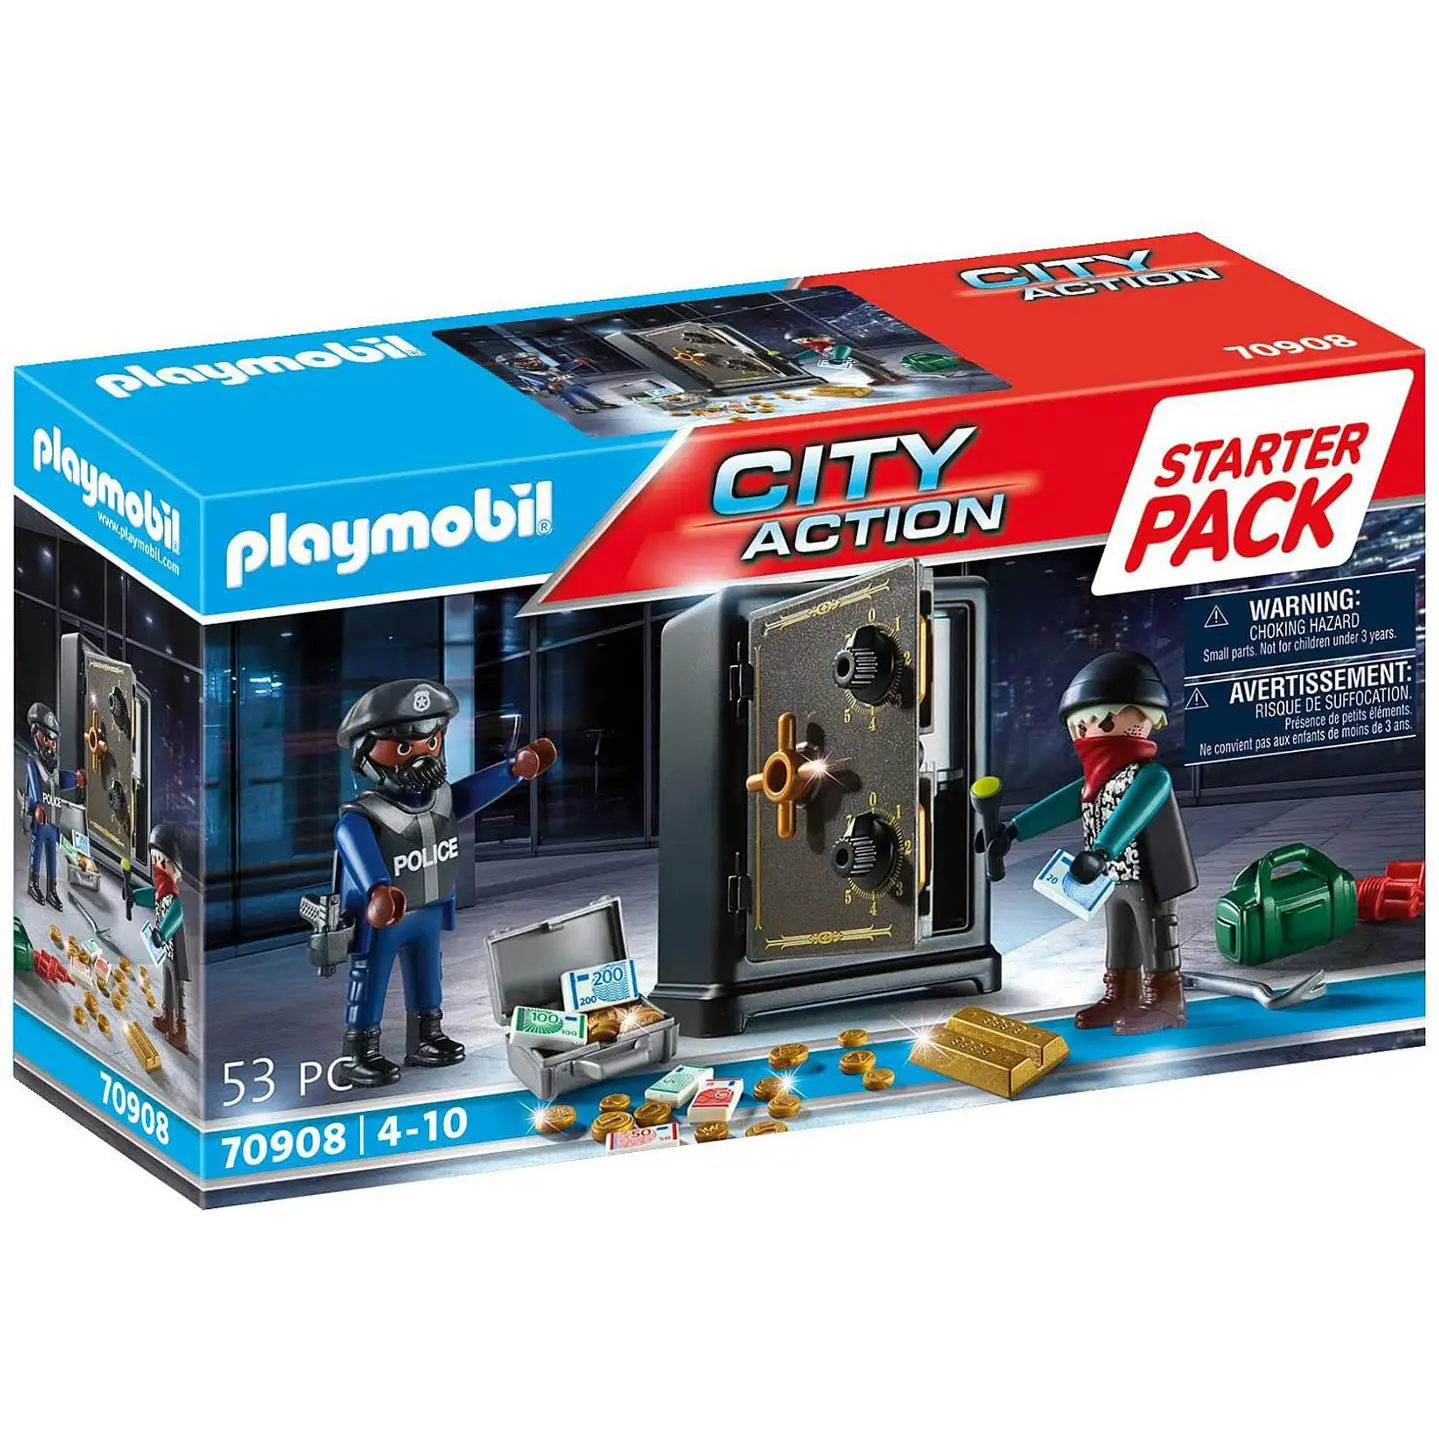 Playmobil City Action - Starter Pack Bank Robbery 70908